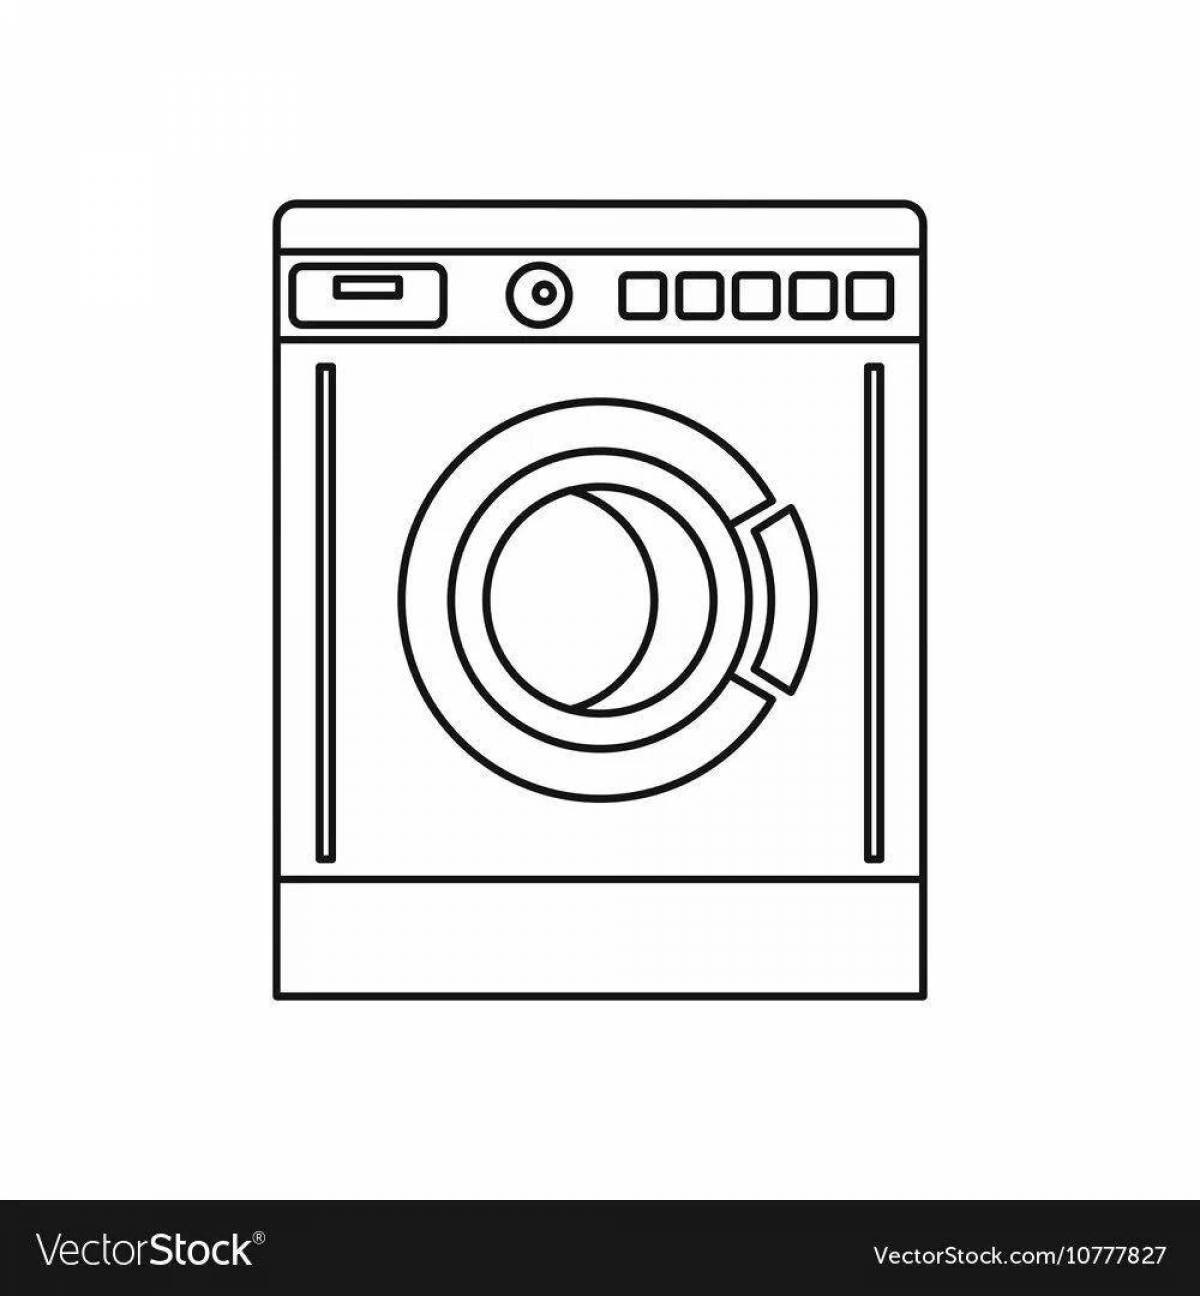 Amazing washing machine coloring page for kids